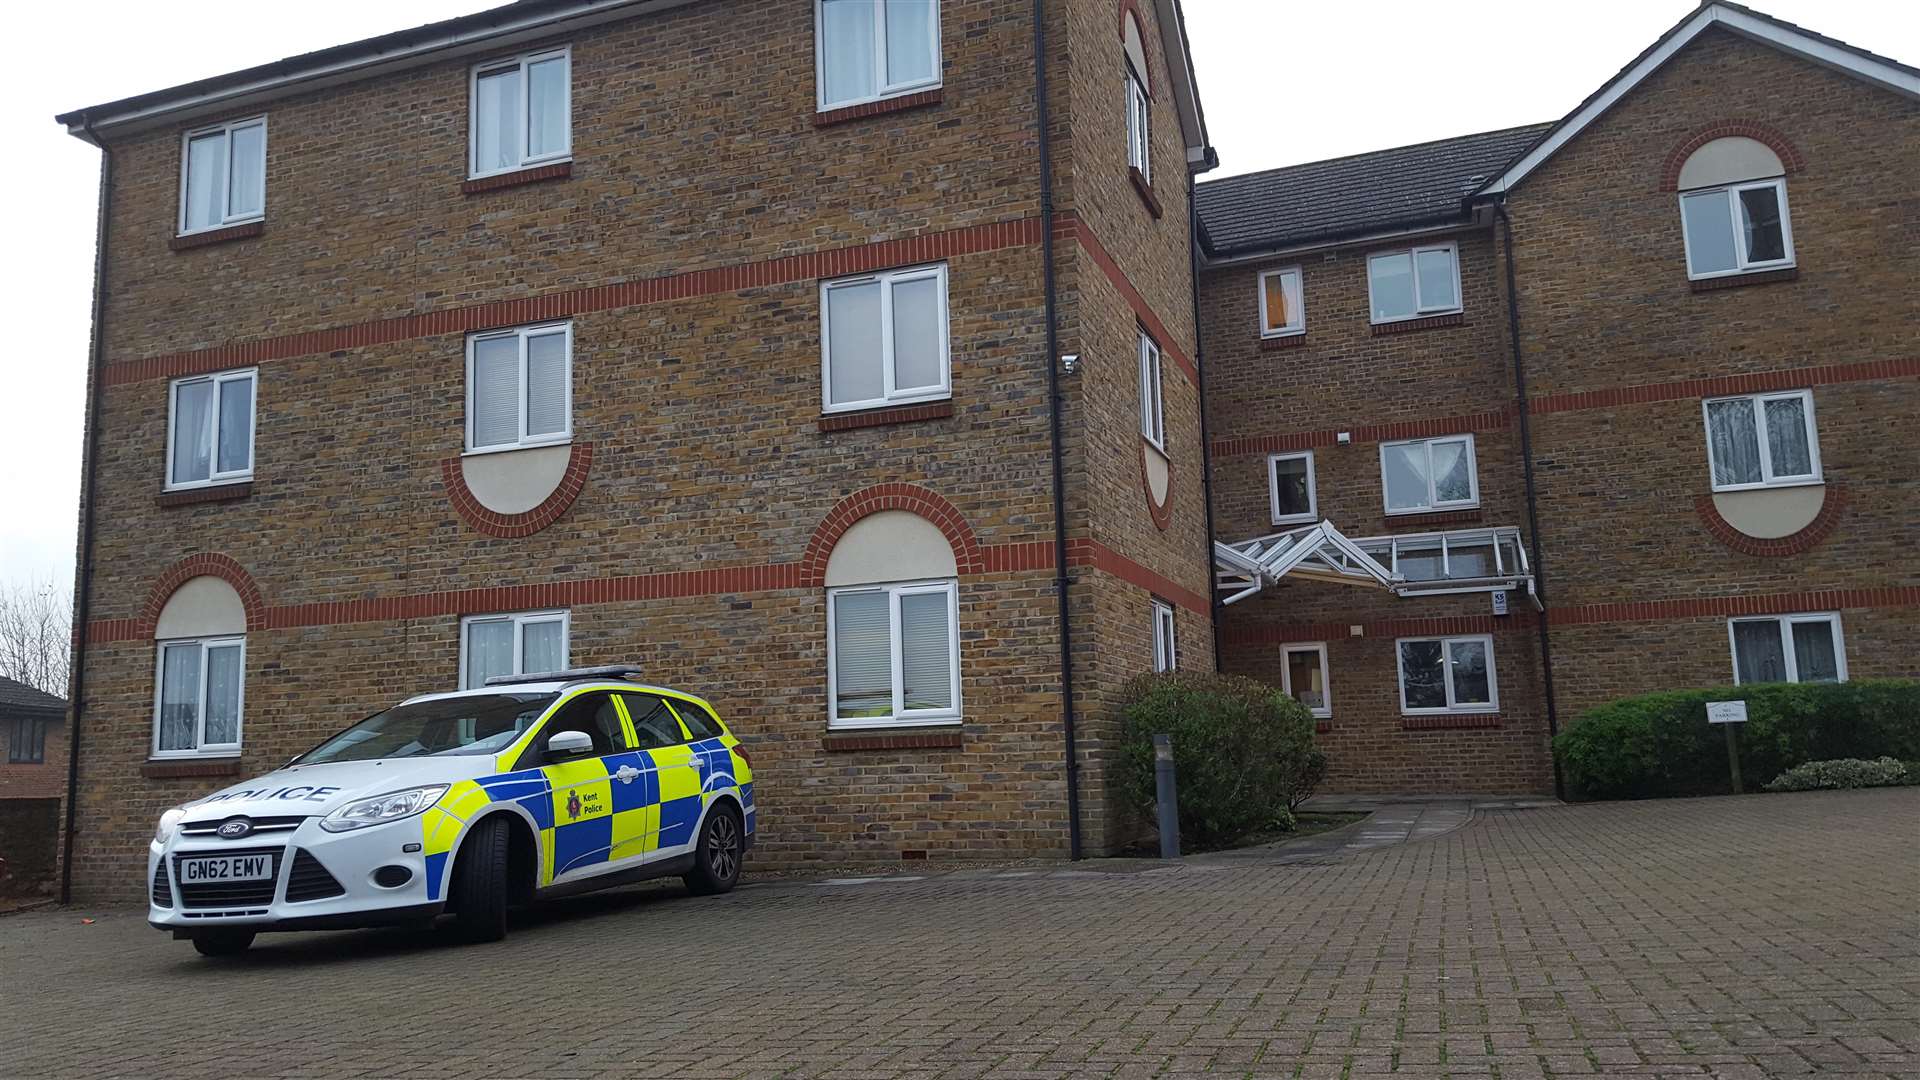 Police at the scene, at Kentish Court in Maidstone